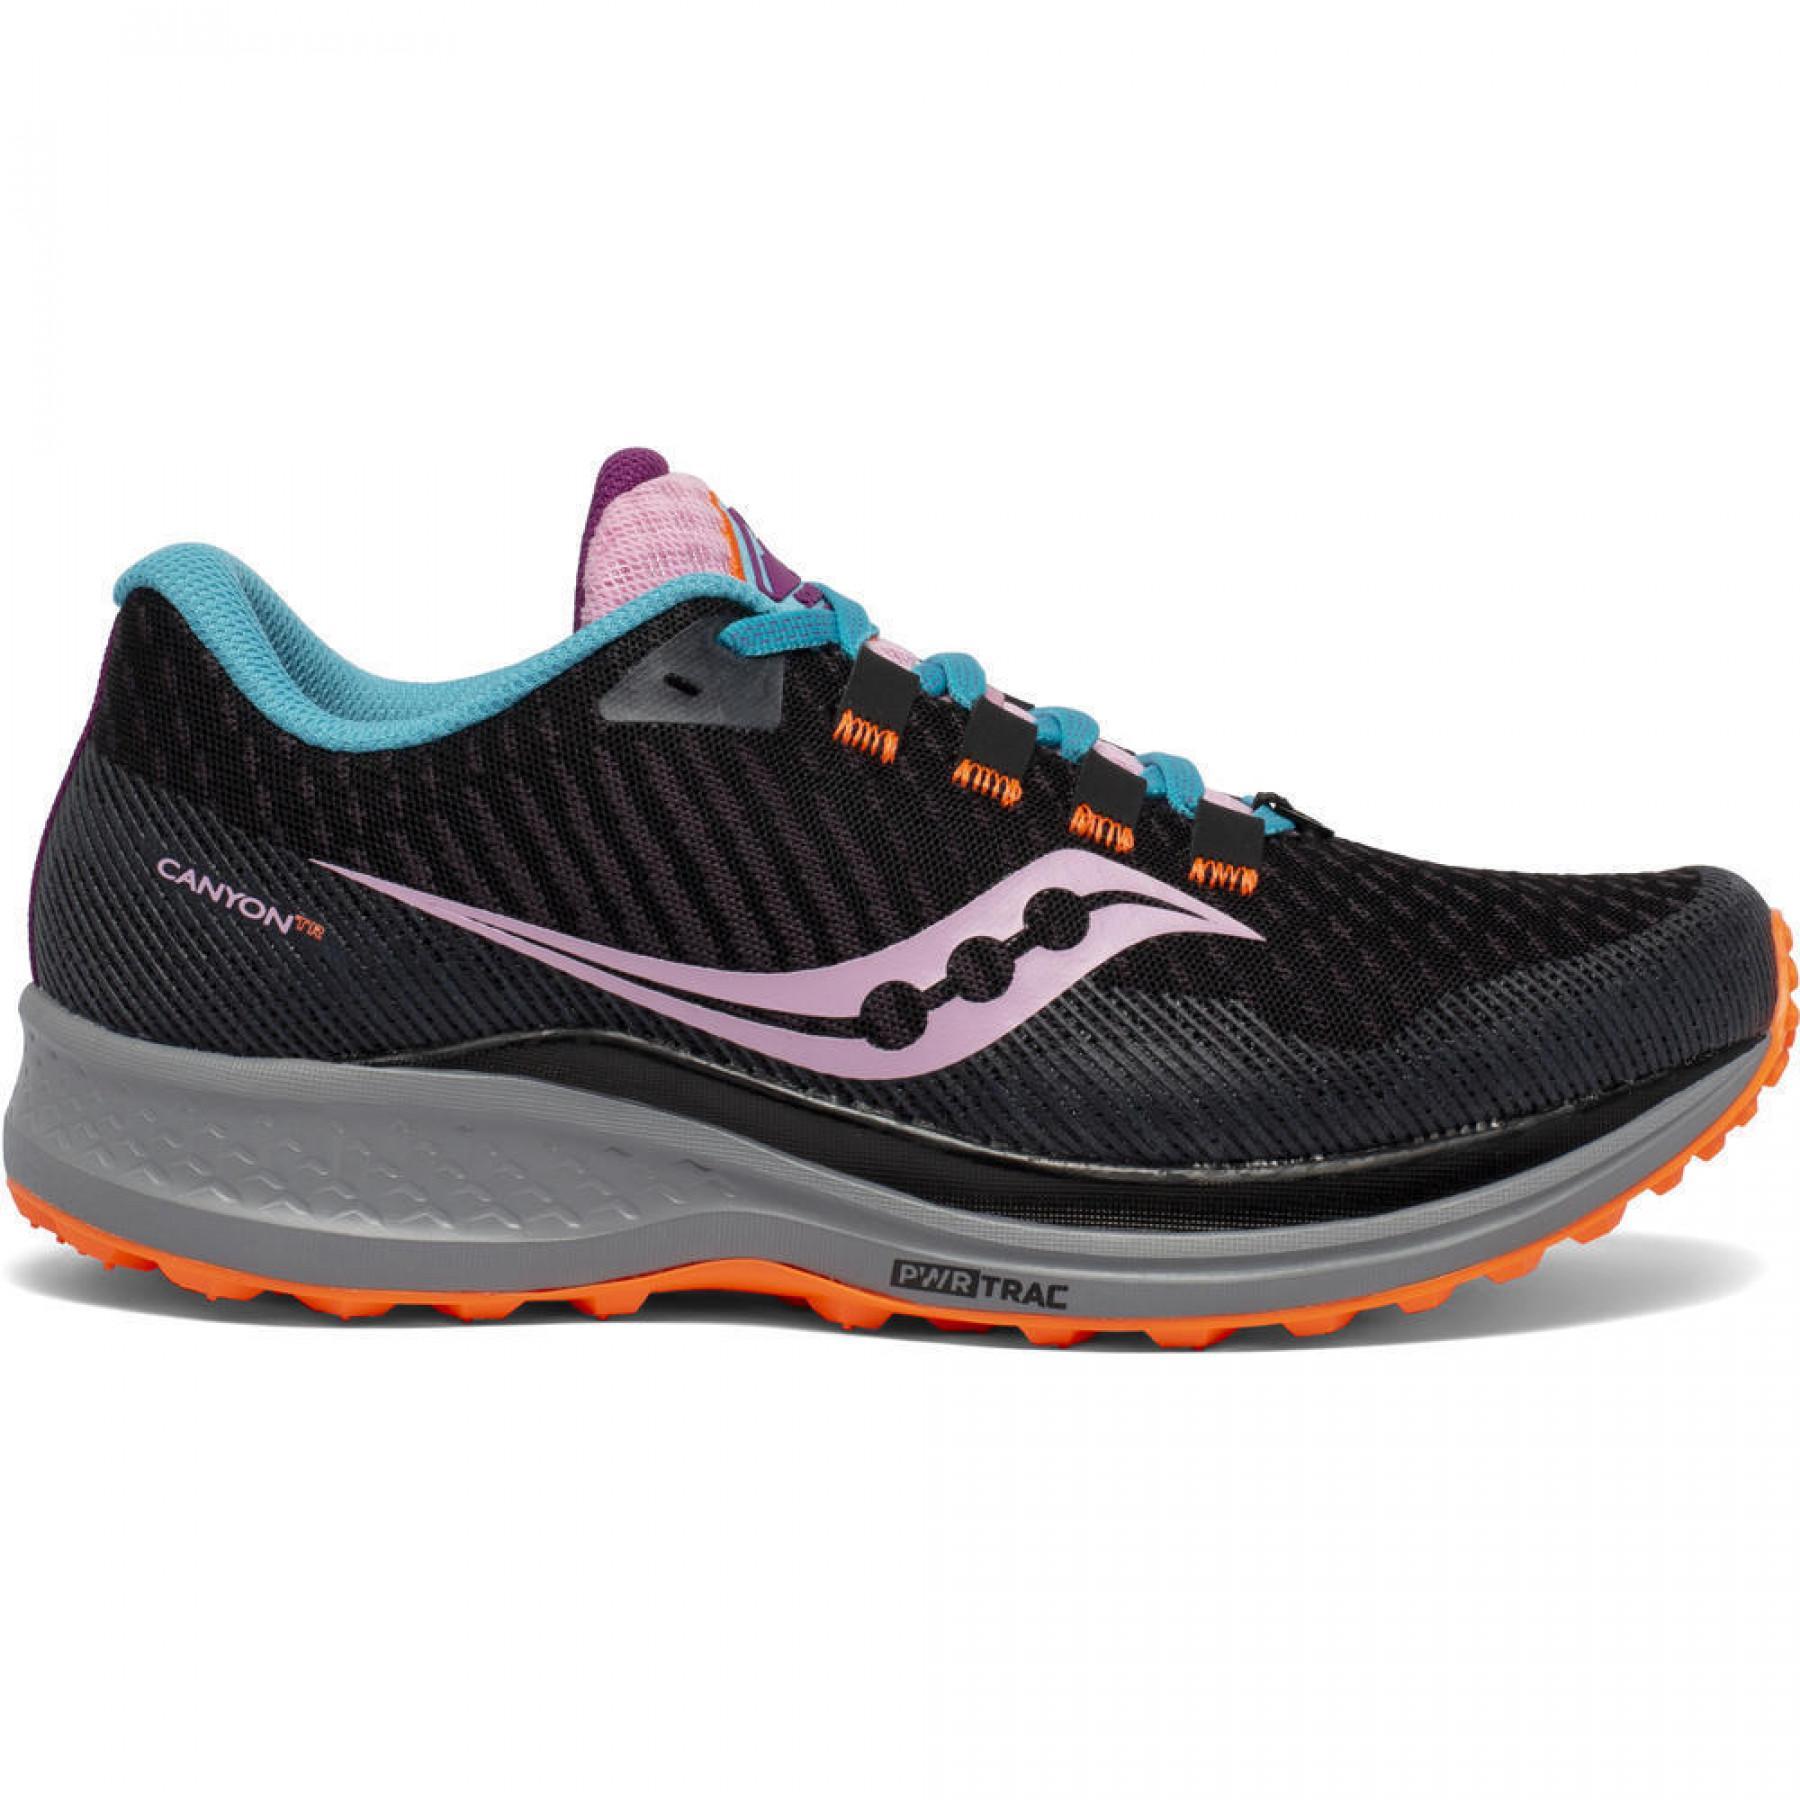 Women's shoes Saucony canyon tr